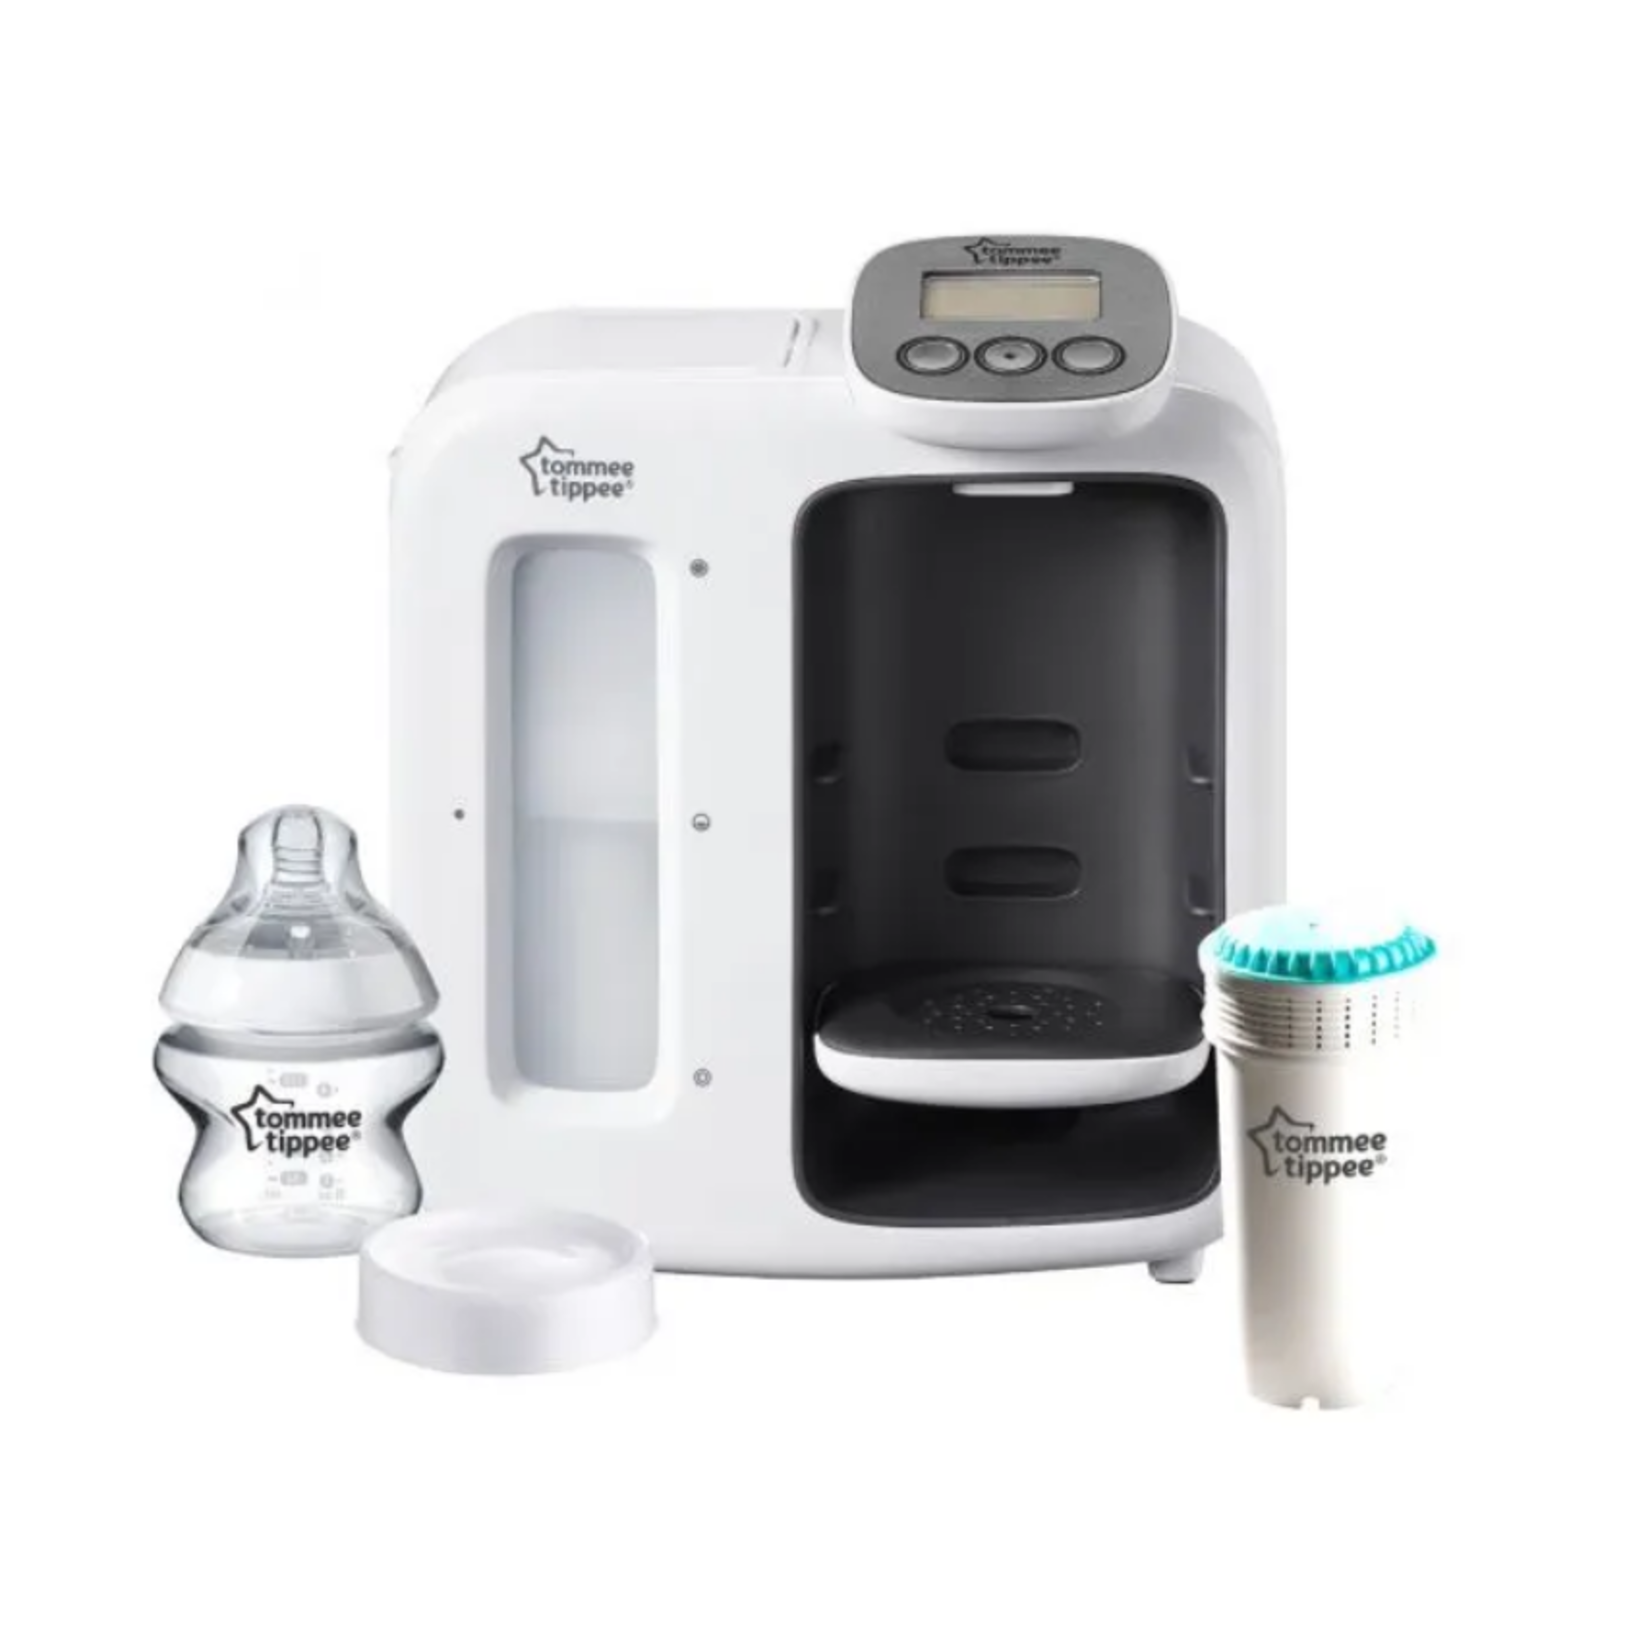 Tommee Tippee Perfect Prep™ Day & Night-WHITE